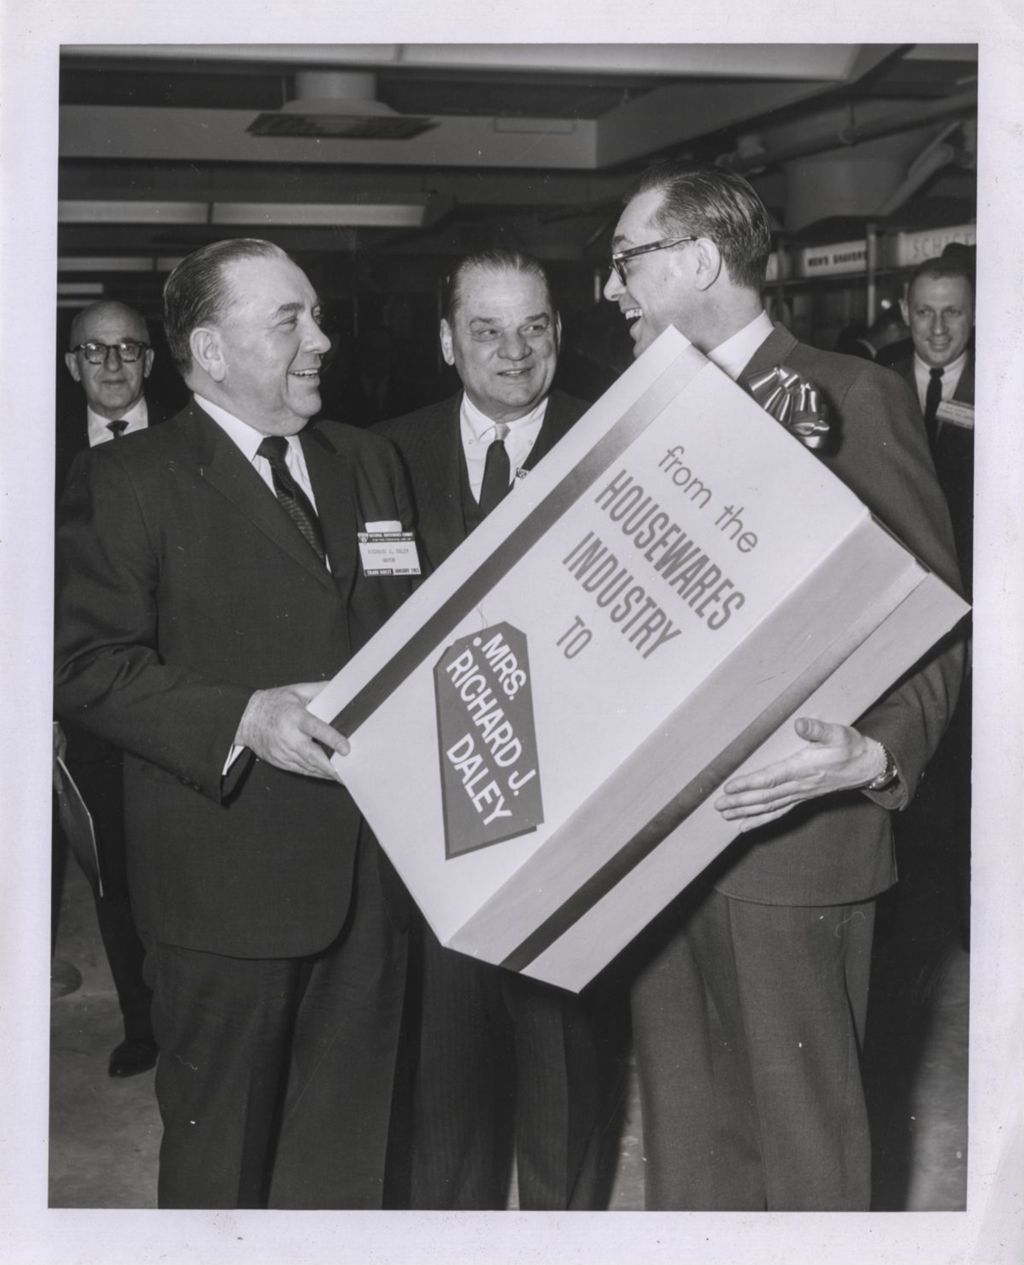 Miniature of Richard J. Daley accepting gift for Eleanor Daley at National Housewares Exhibit